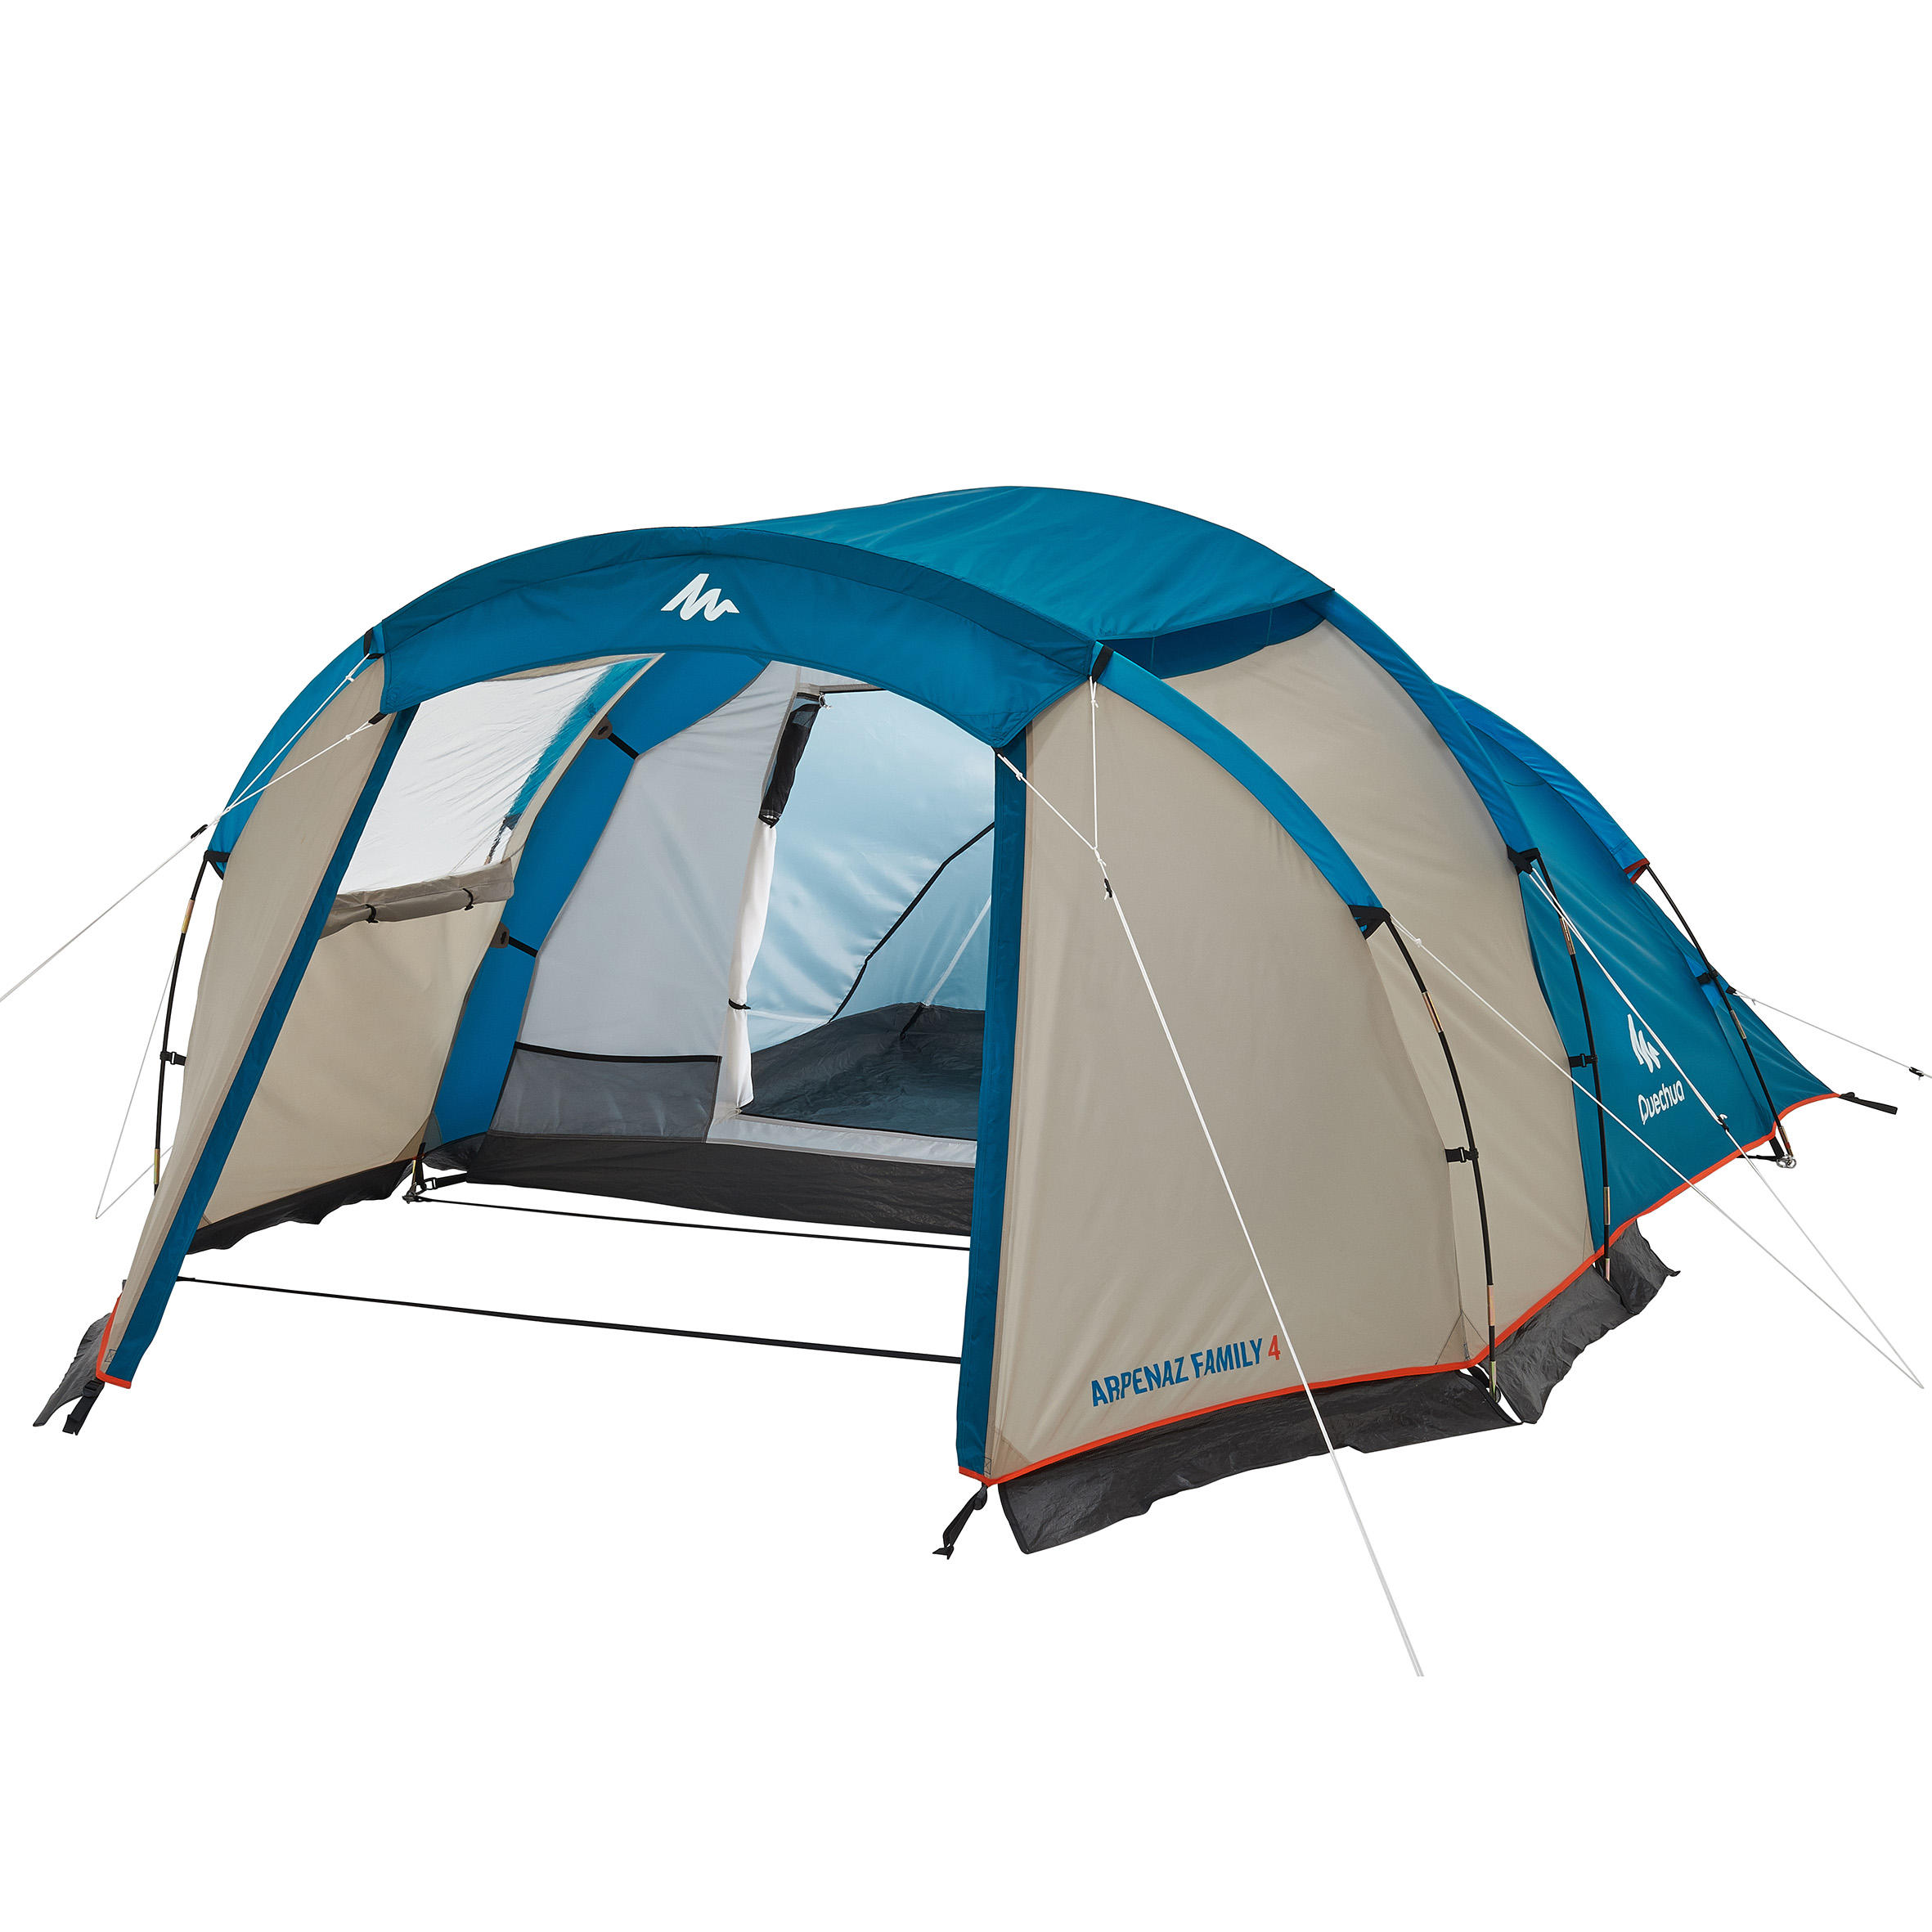 Hiking Tents Online In India|Arpenaz 